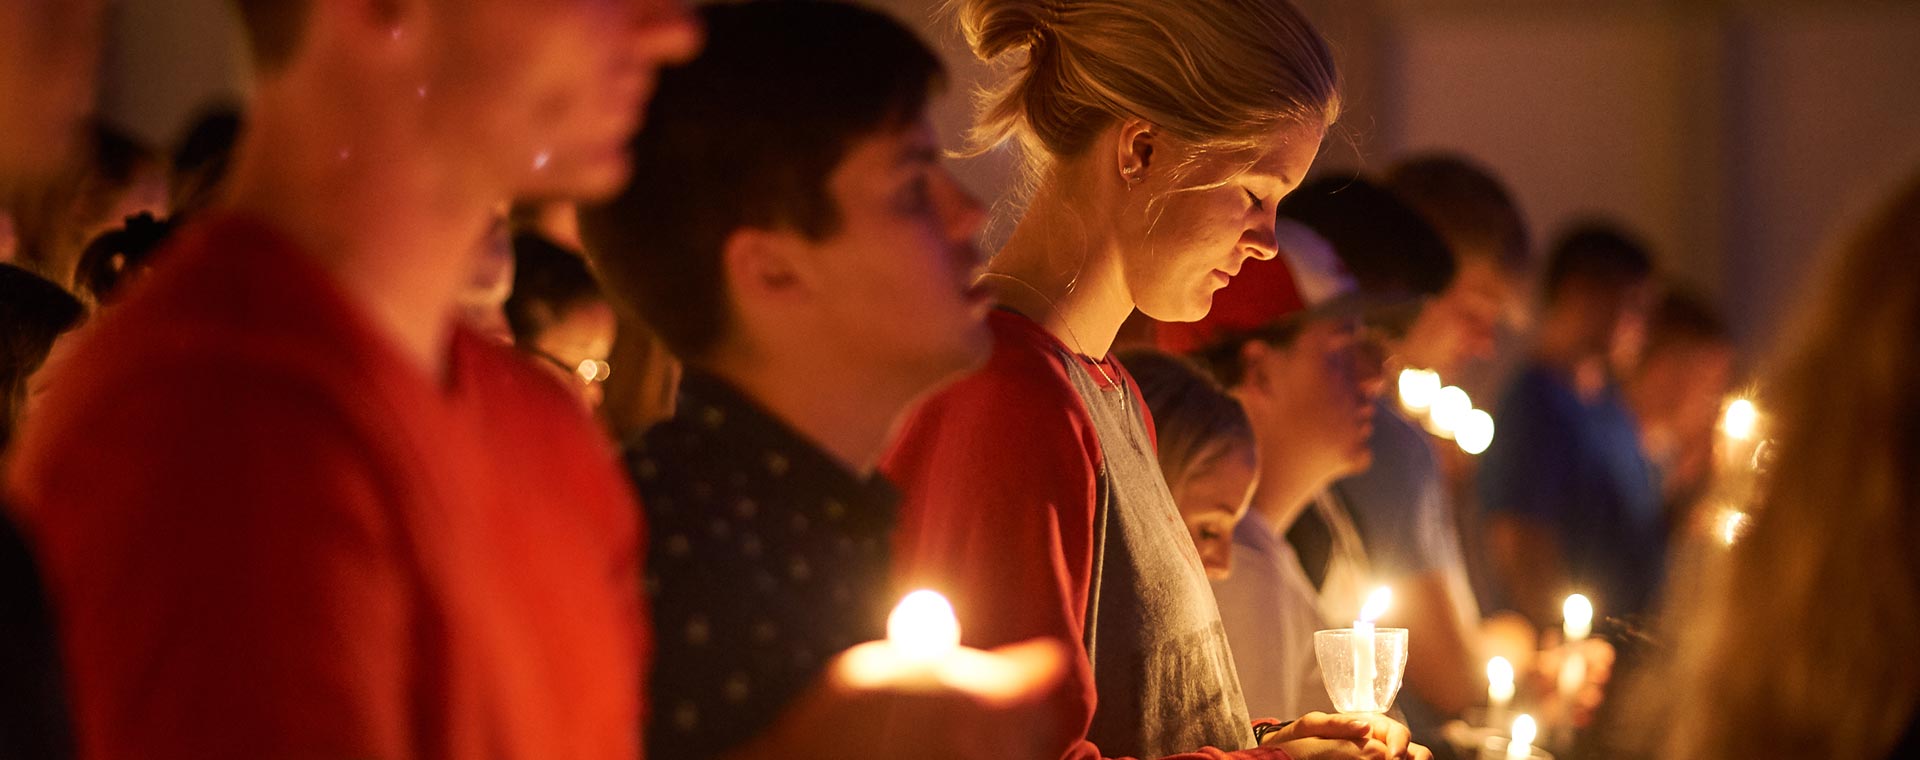 Christianity Today calls Northwestern a best college for spiritual enrichment.